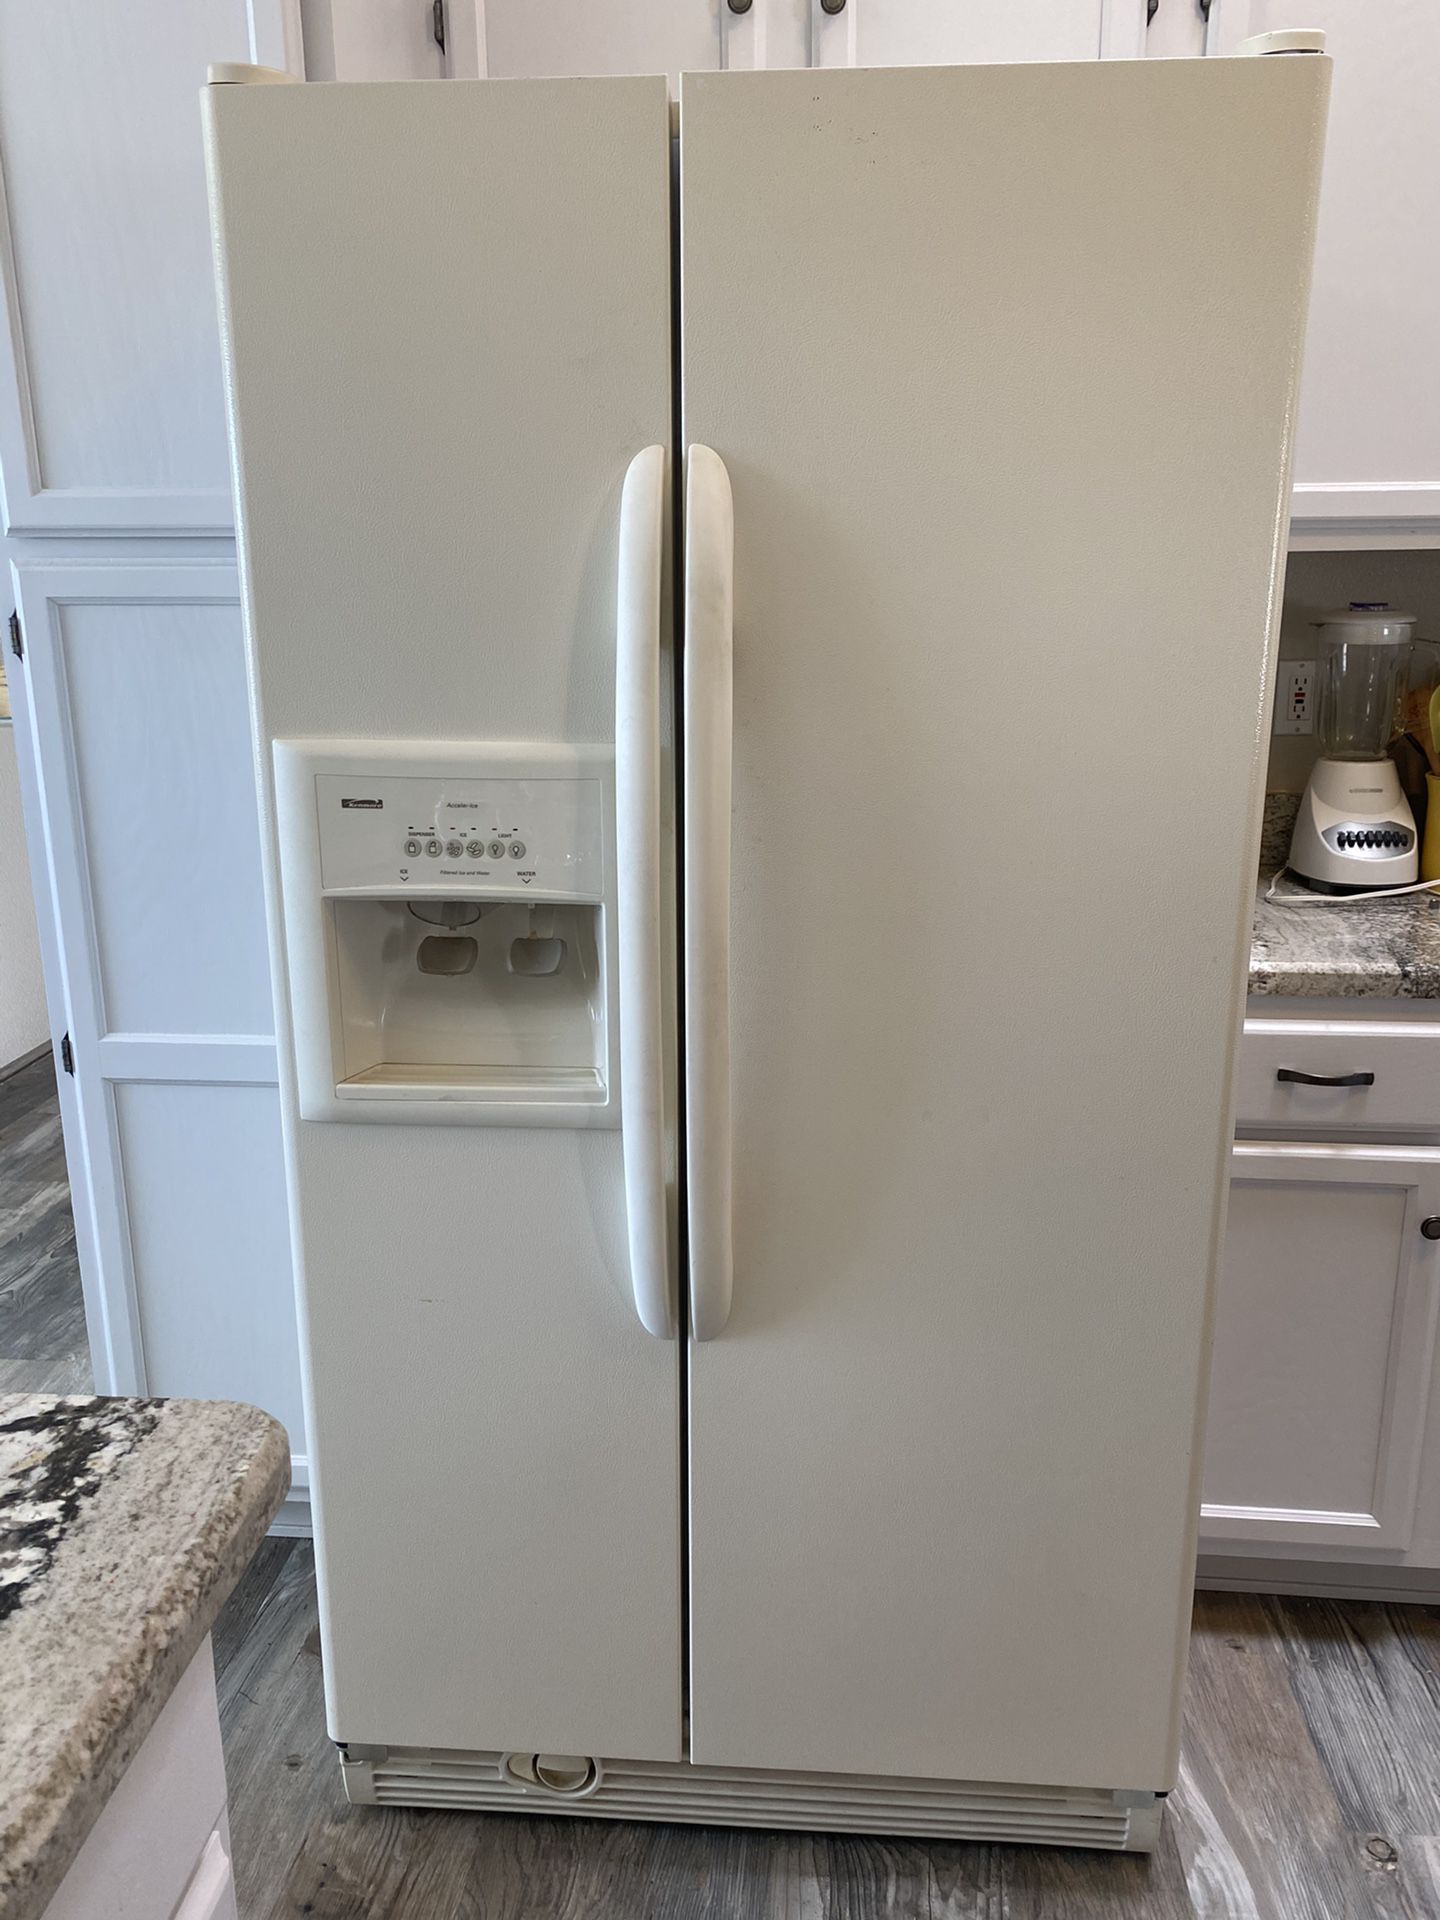 Kenmore Coldspot refrigerator. Very good condition. First $150 takes it home. Text Bill at {contact info removed} in you have any questions.